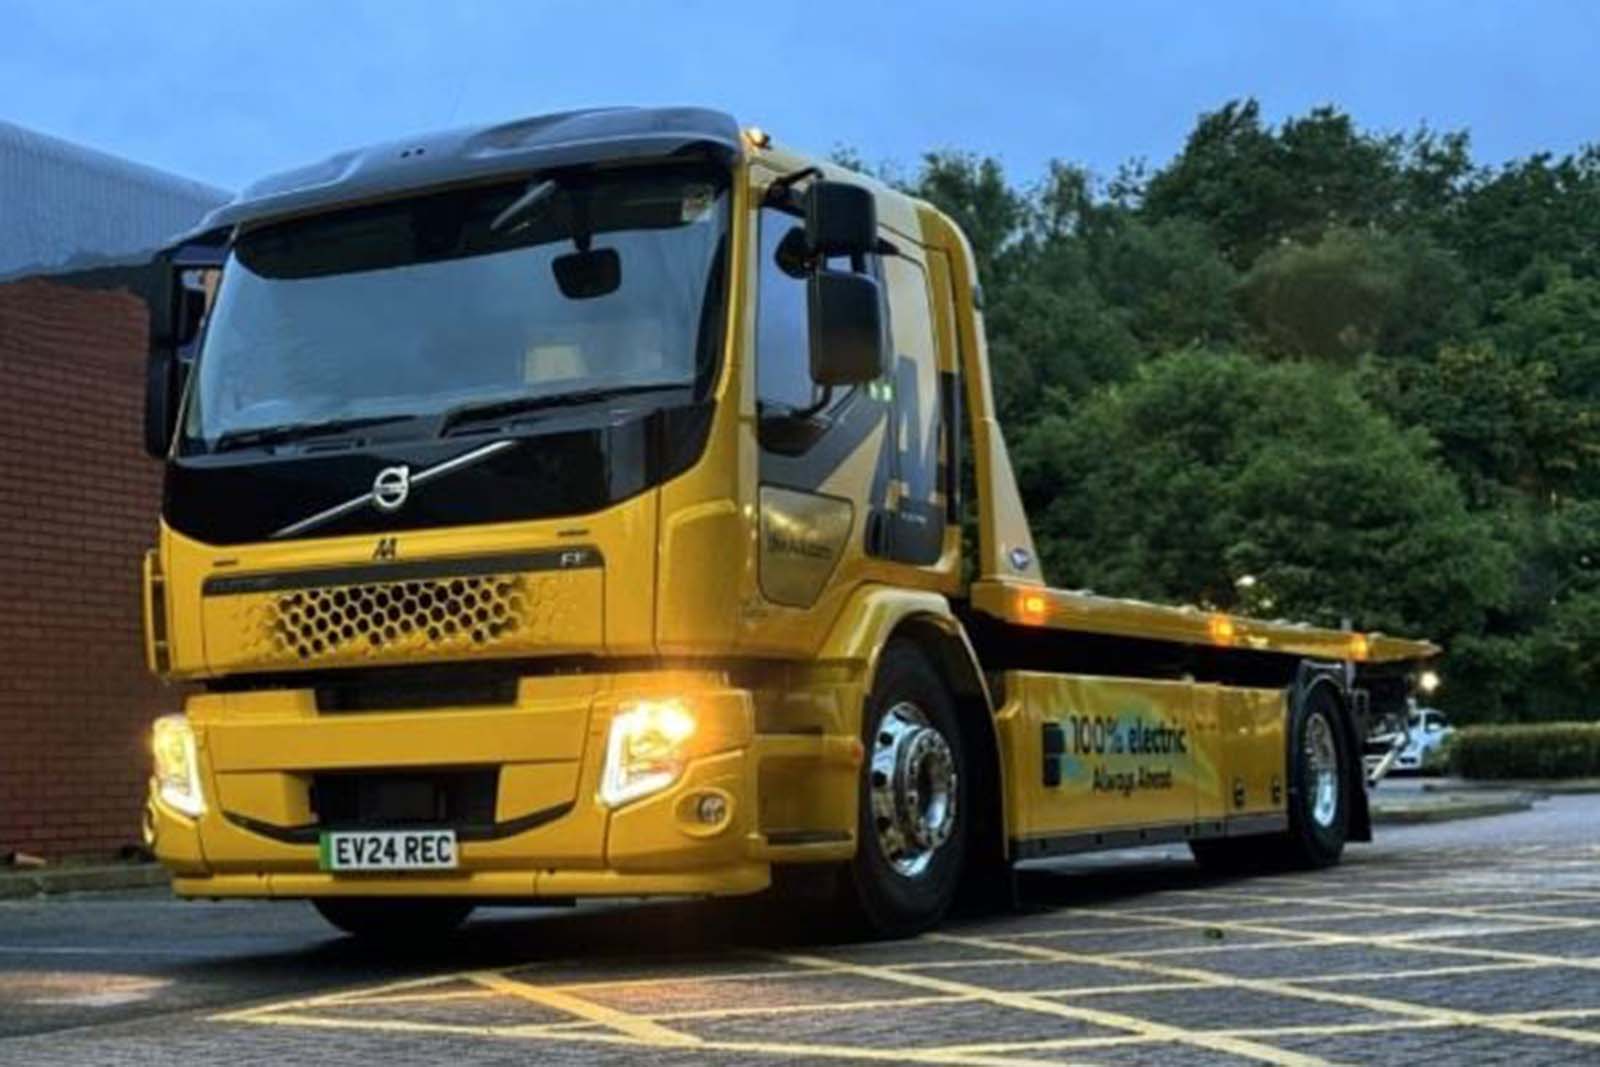 AA is the first firm to deploy electric recovery vehicles in the UK